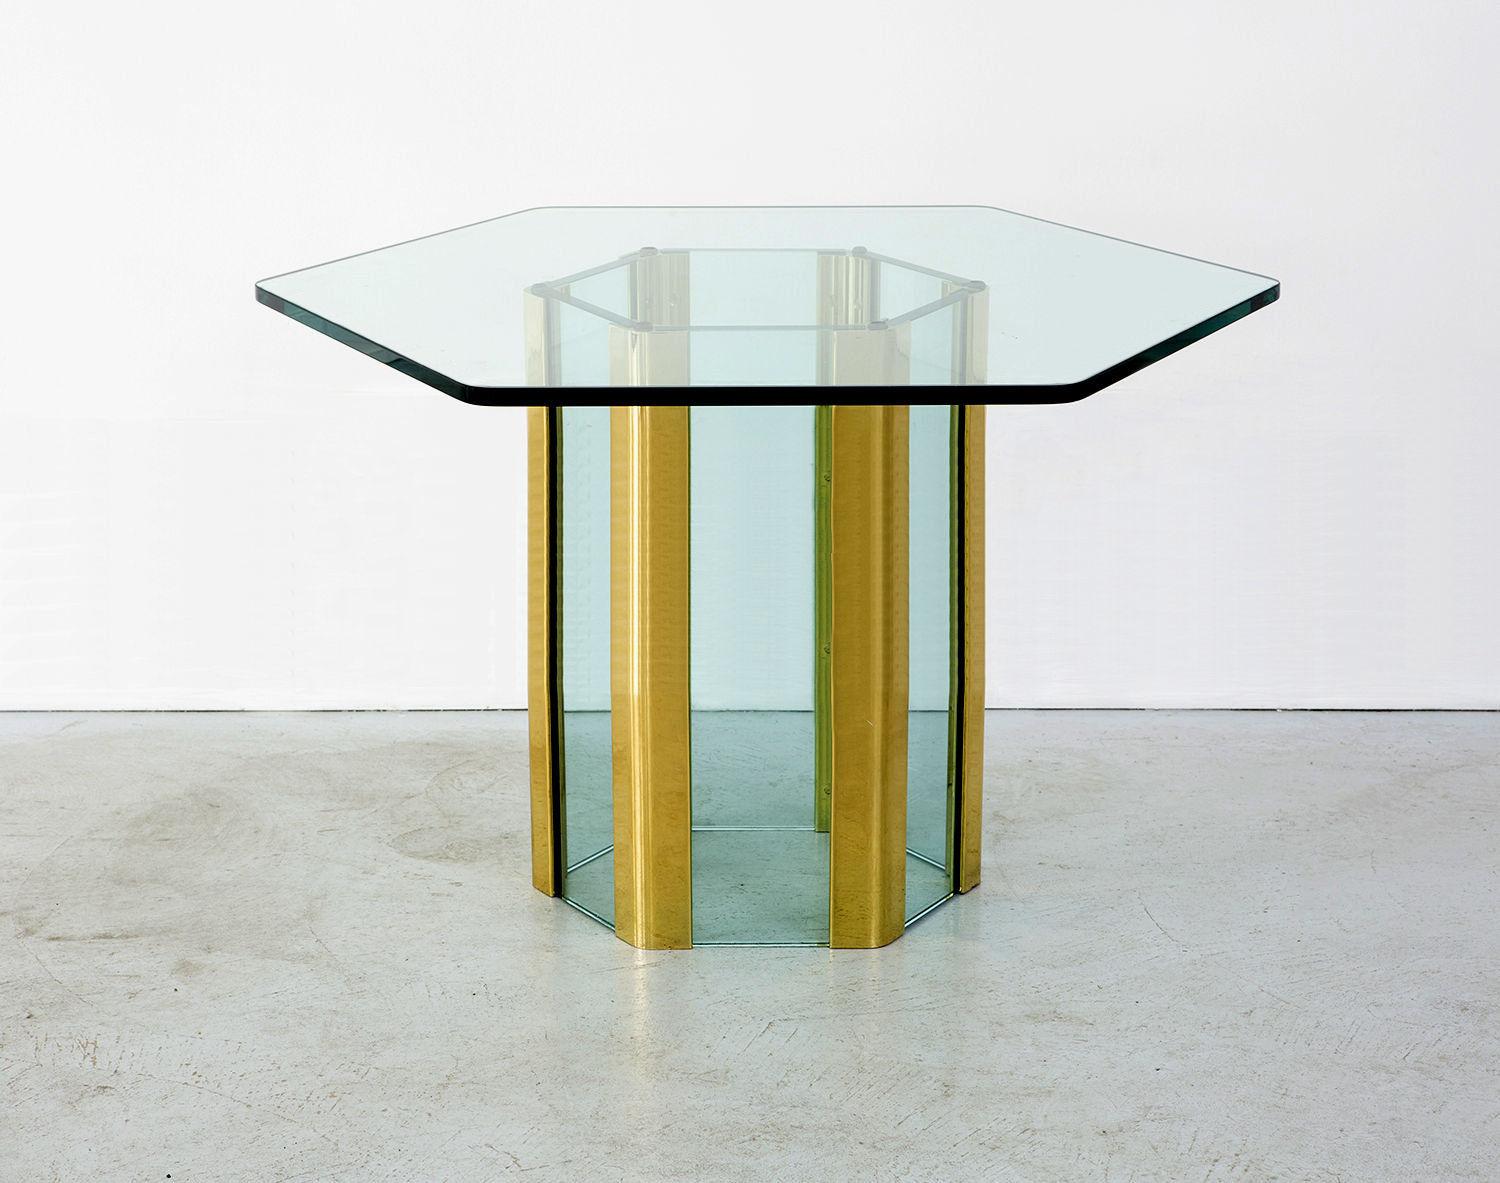 An elegant waterfall dining table designed by Leon Rosen for The Pace Collection in a rare hexagonal form. Thick glass with corners of solid nickel dipped in gold, with a nice patina. Stunning.

Dimensions are for the base, measured side to side.